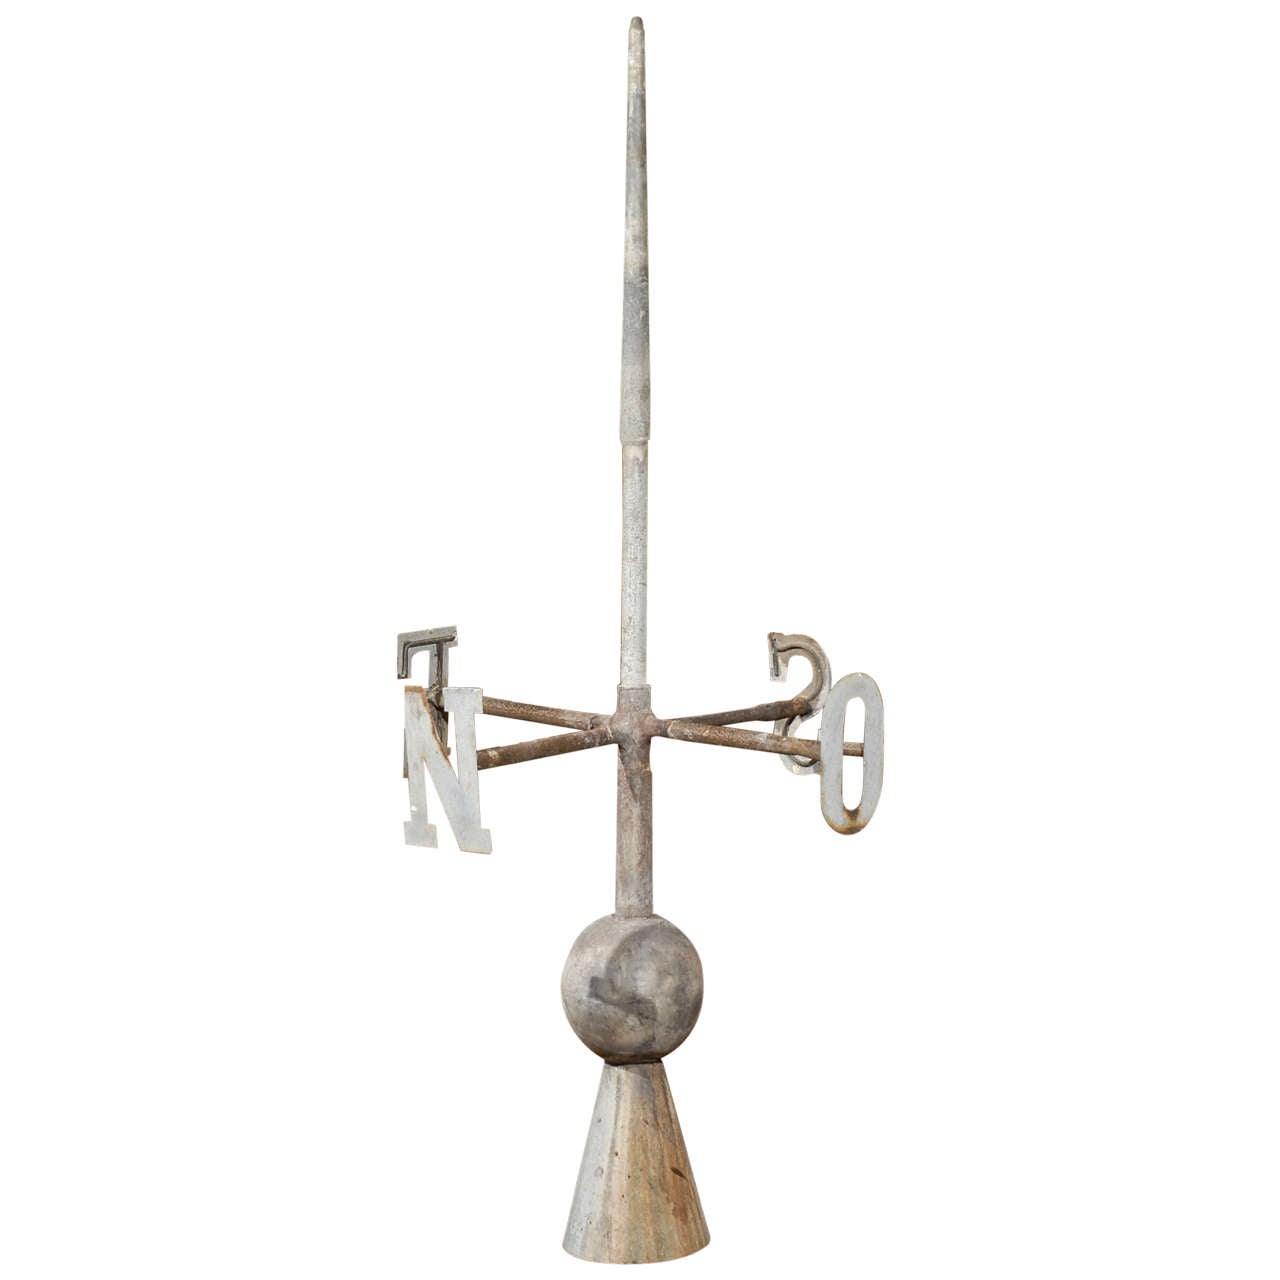 French Zinc Weathervane Finial with All Directions from the Early 20th Century